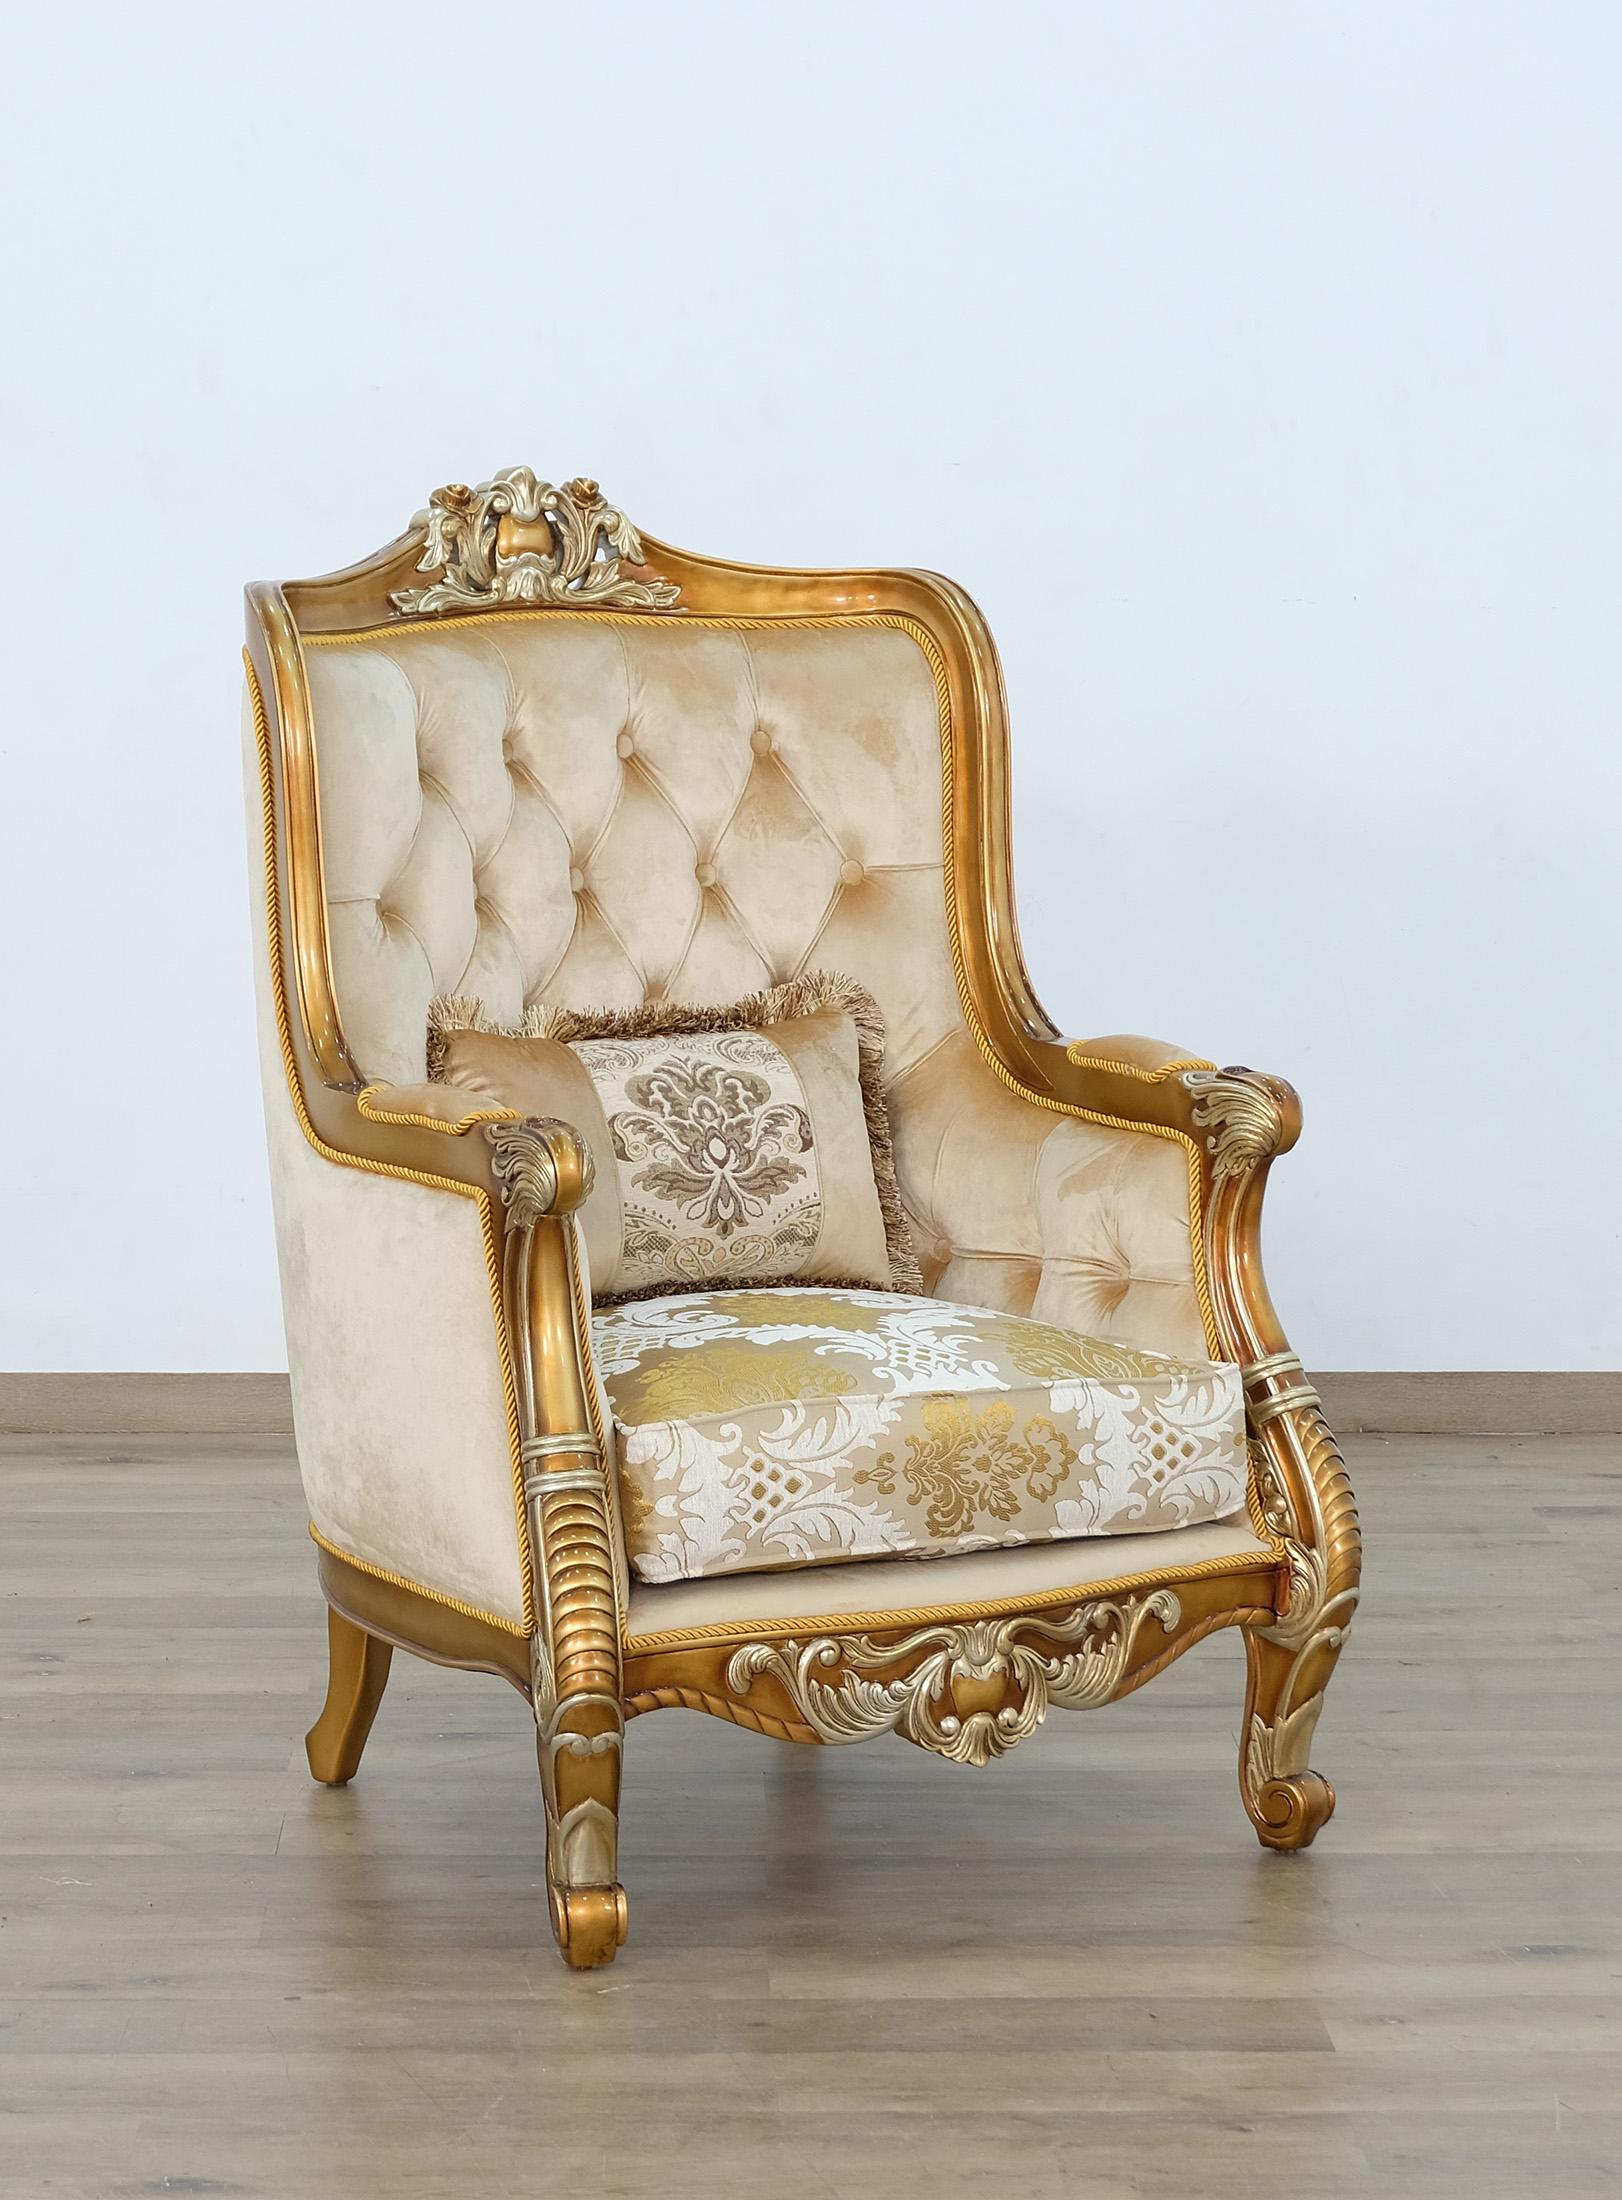 Classic, Traditional Arm Chair LUXOR II 68587-C in Antique, Gold, Brown Fabric